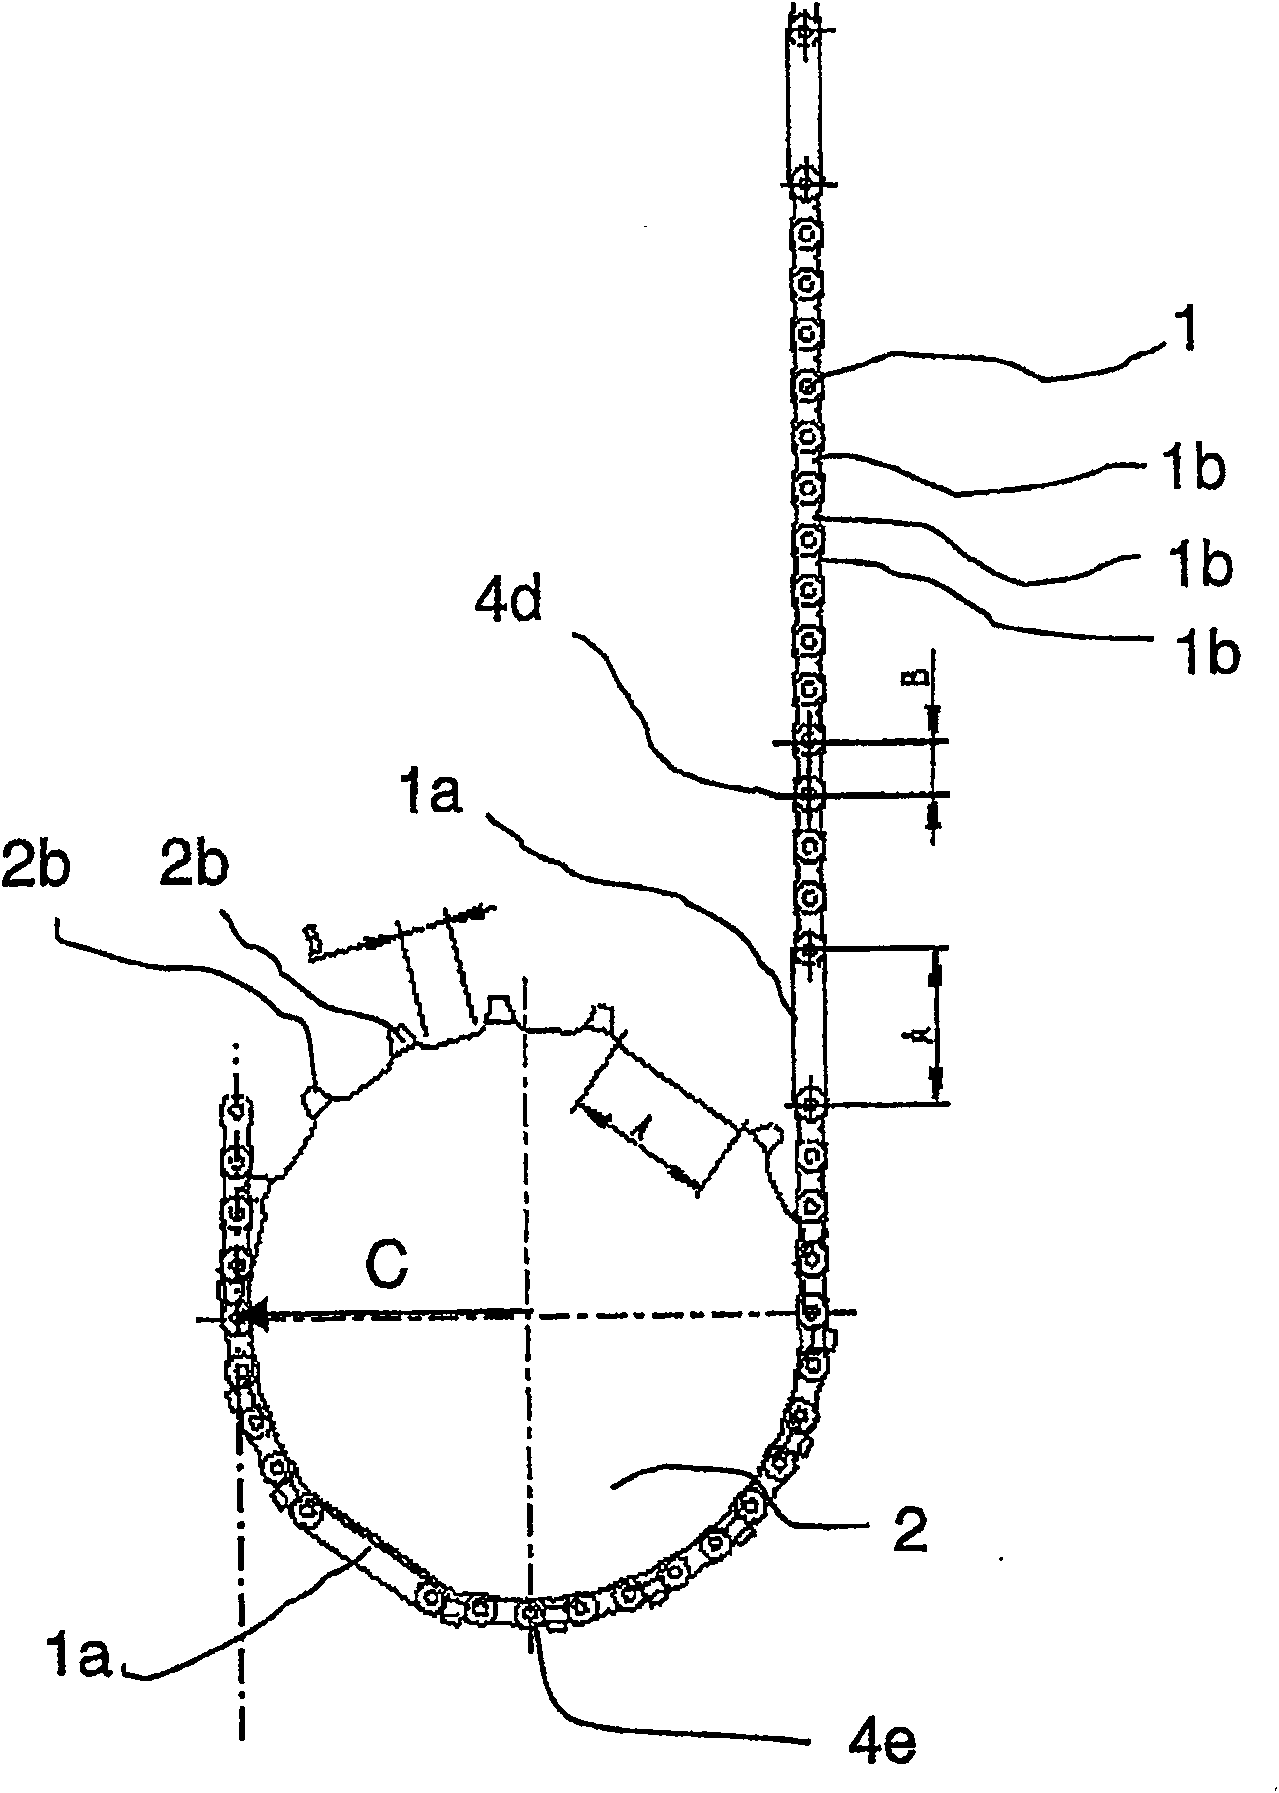 An apparatus for driving one or more processing stations, and a chain for use in the apparatus